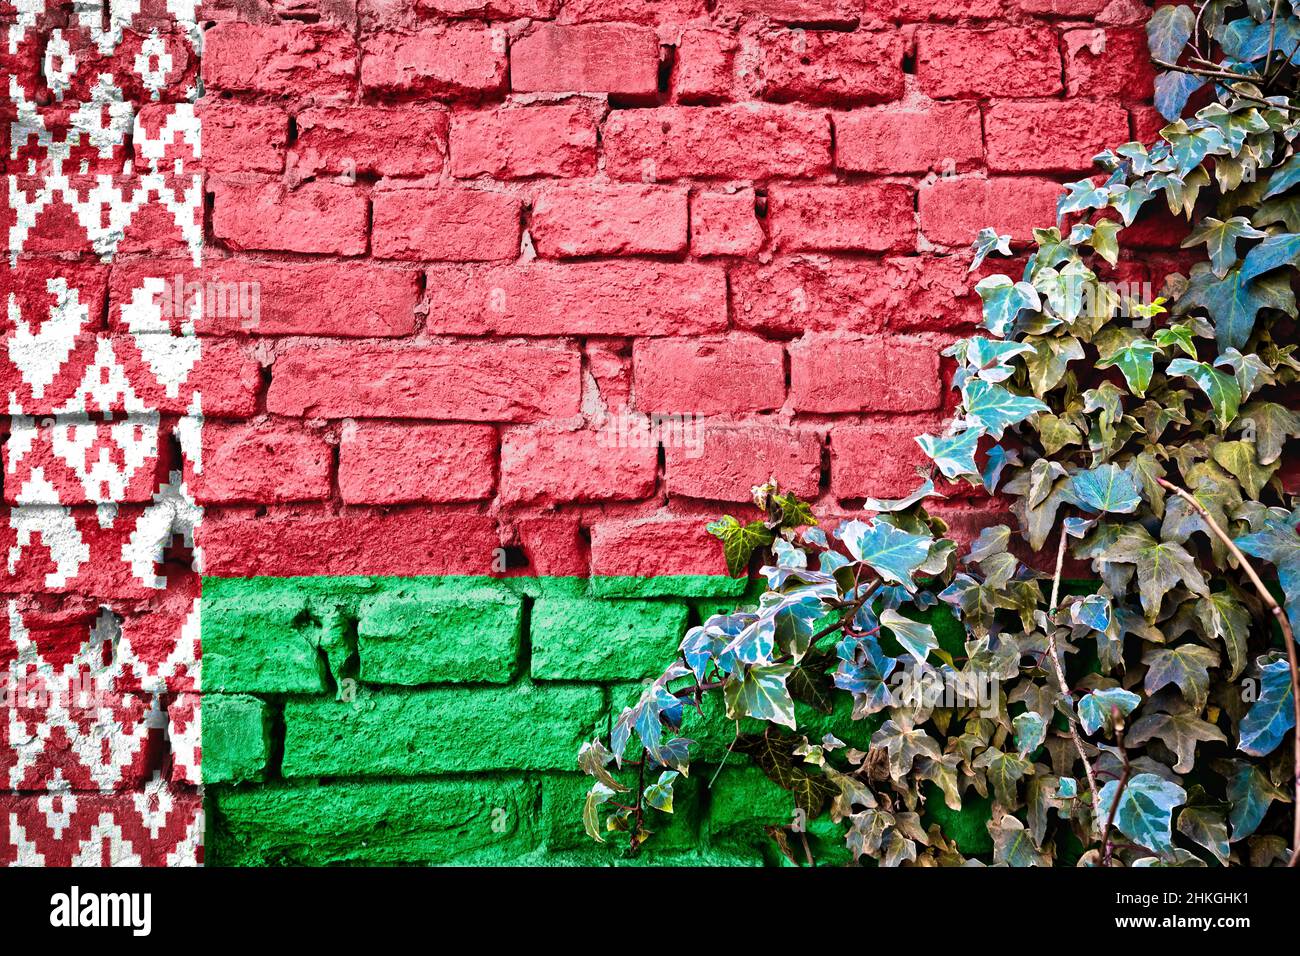 Belarus grunge flag on brick wall with ivy plant, country symbol concept Stock Photo